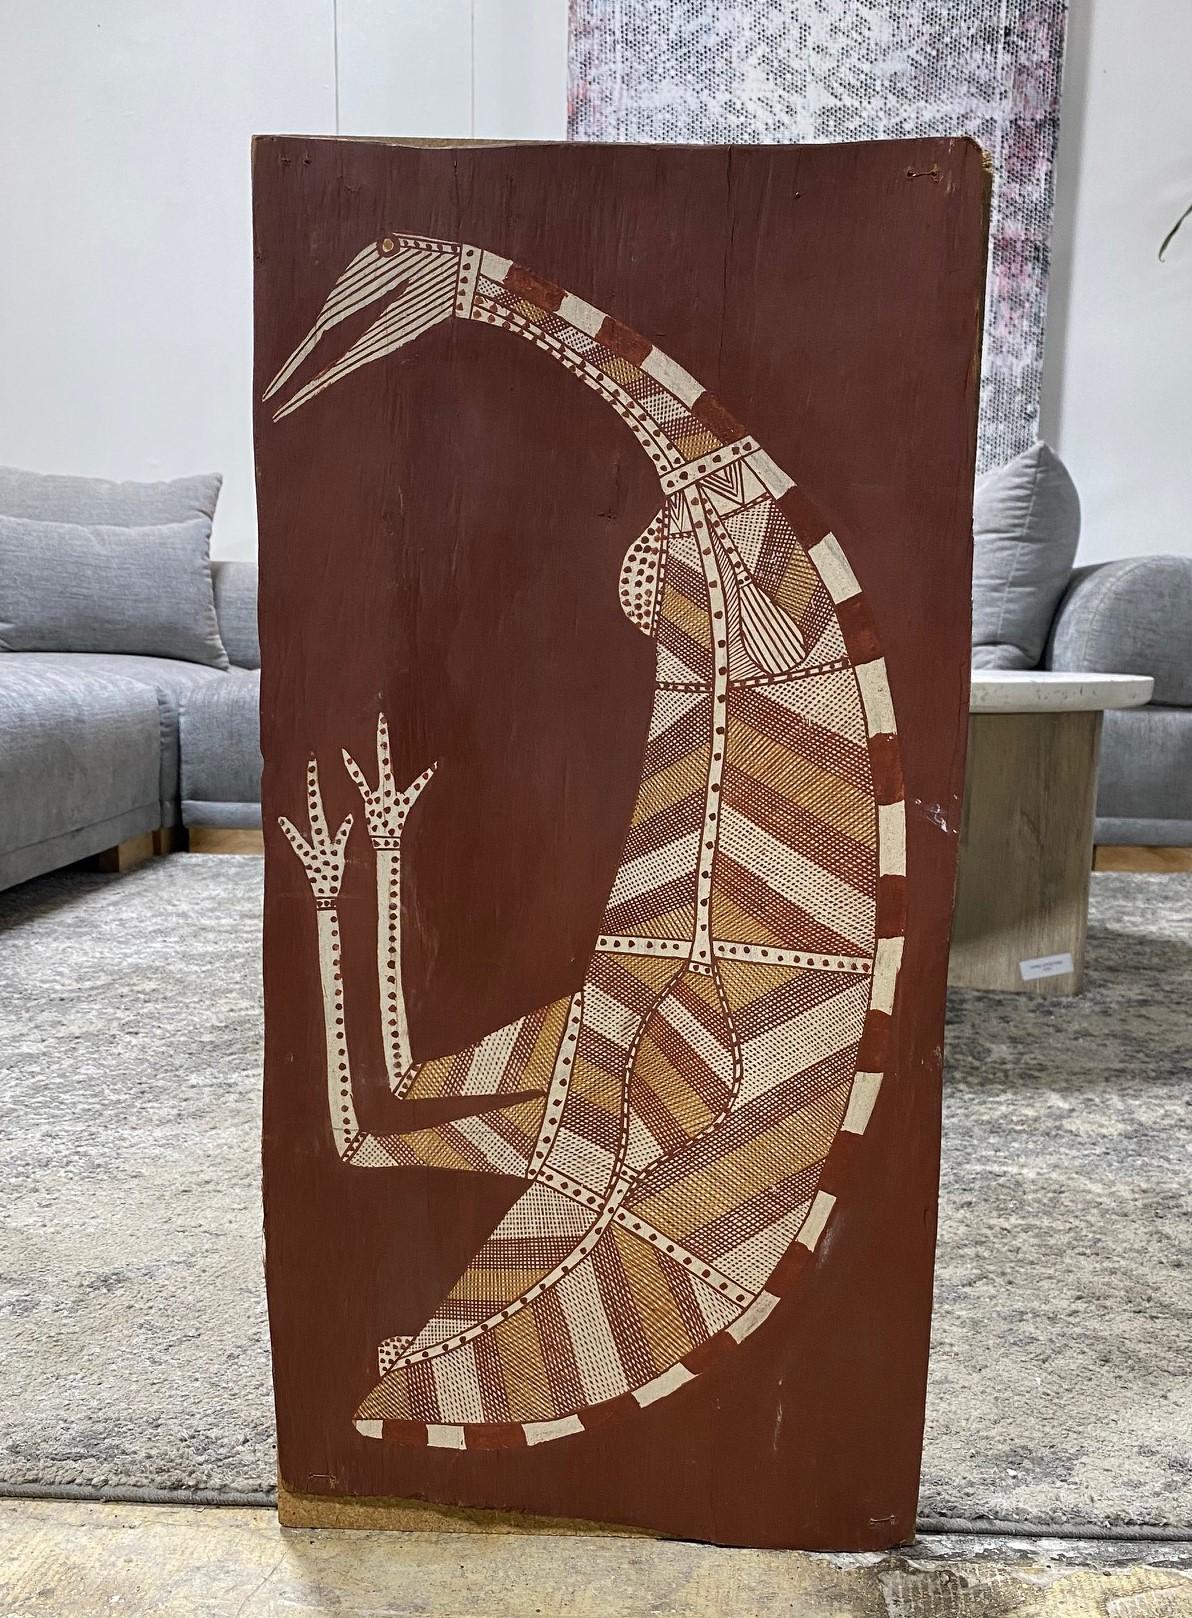 A wonderful, unique, and very engaging original indigenous painting by Australian Aboriginal artist Thompson Yulidjirri, (C1930-2009). The painting is made with natural earth pigments on eucalyptus bark and mounted to a backing for display.  It was